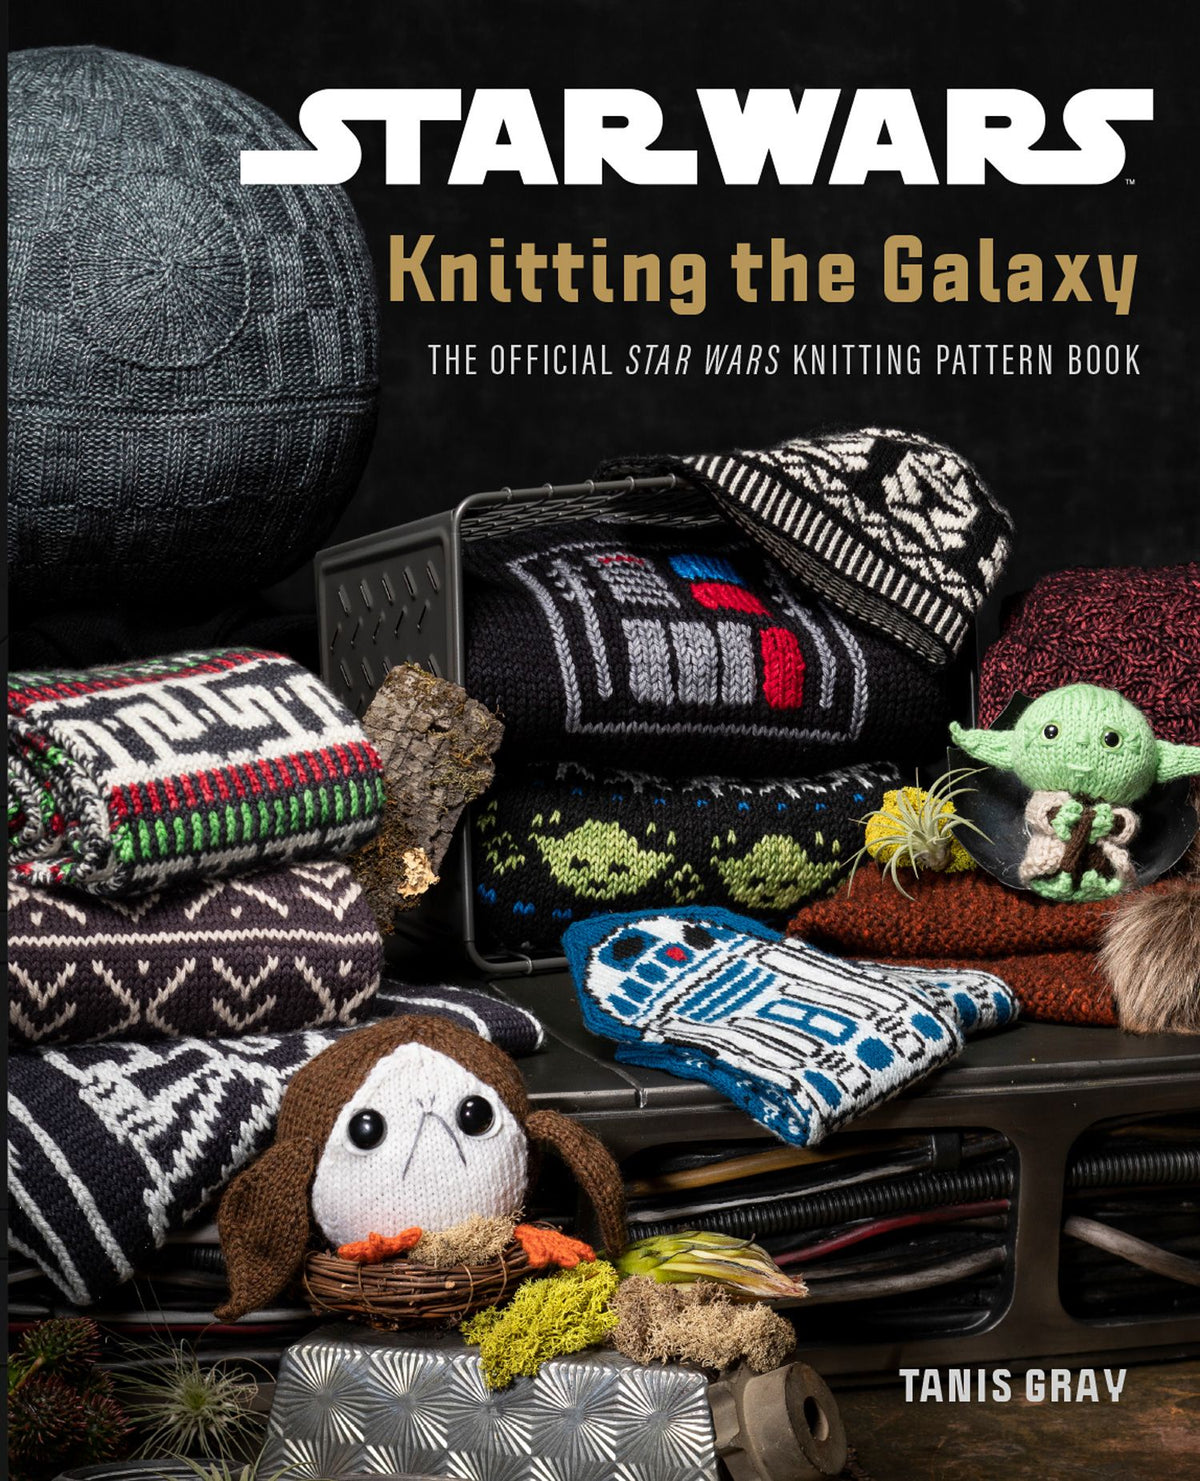 Star Wars:  Knitting the Galaxy - The Official Star Wars Knitting Pattern Book - Tanis Gray